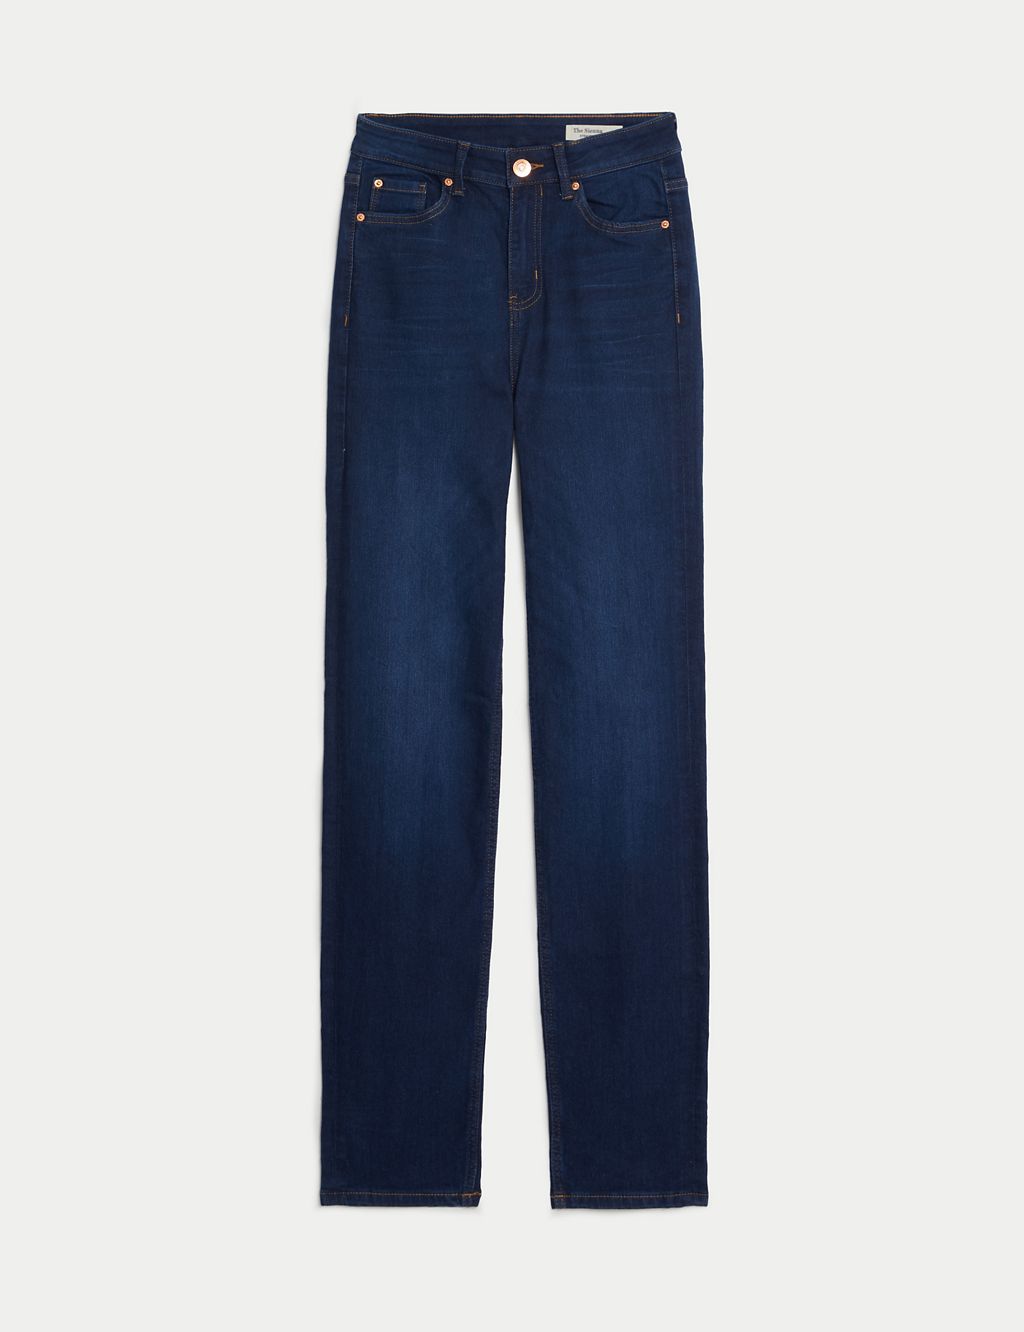 Sienna Straight Leg Jeans with Stretch 1 of 8